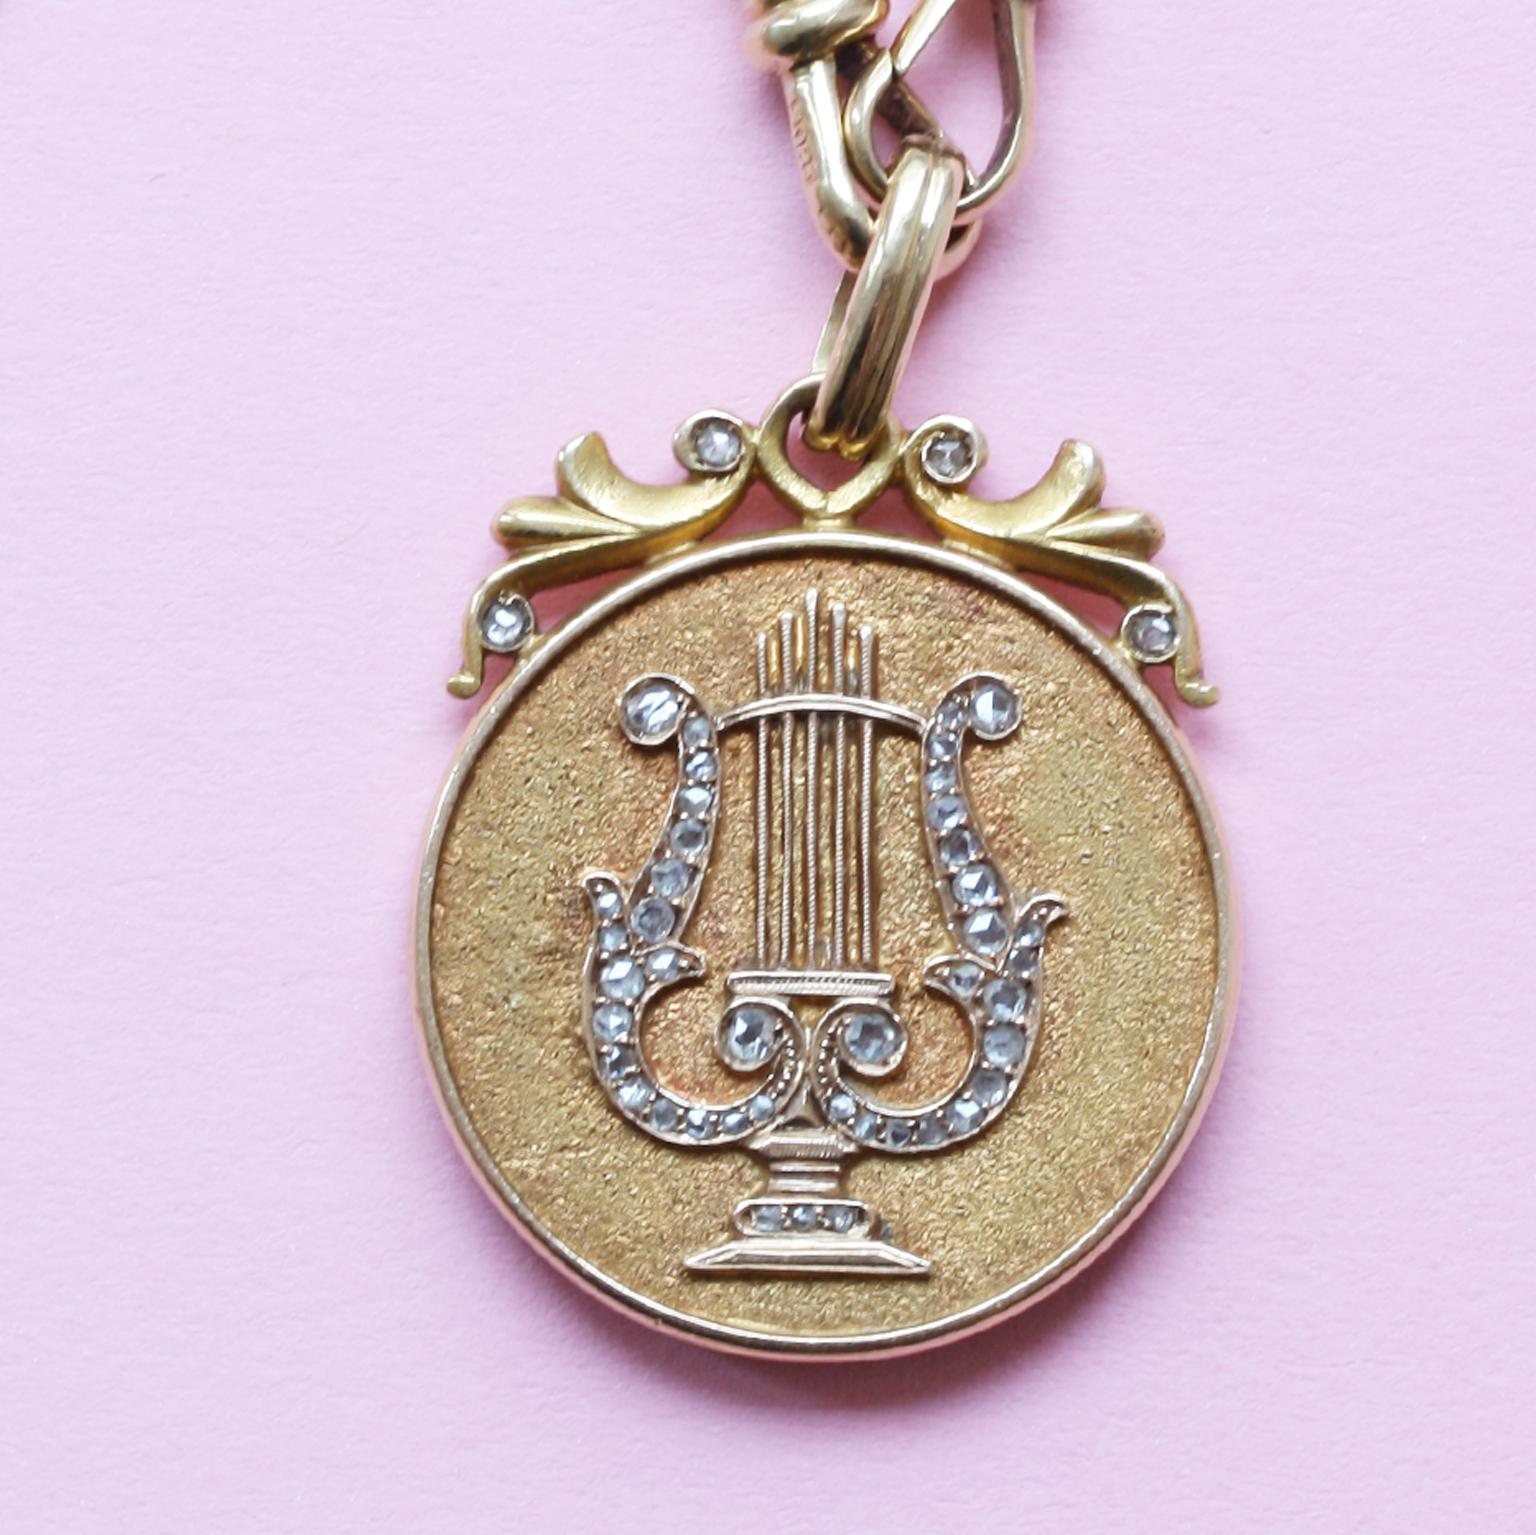 A large gold locket decorated with a lyre in rose cut diamonds, the lyre was Apollo or Orpheus attribute and it is the symbol for poets and for harmony, American, circa 1900, in its original case.

weight: 16.35 grams
dimensions: 4.5 x 3 cm